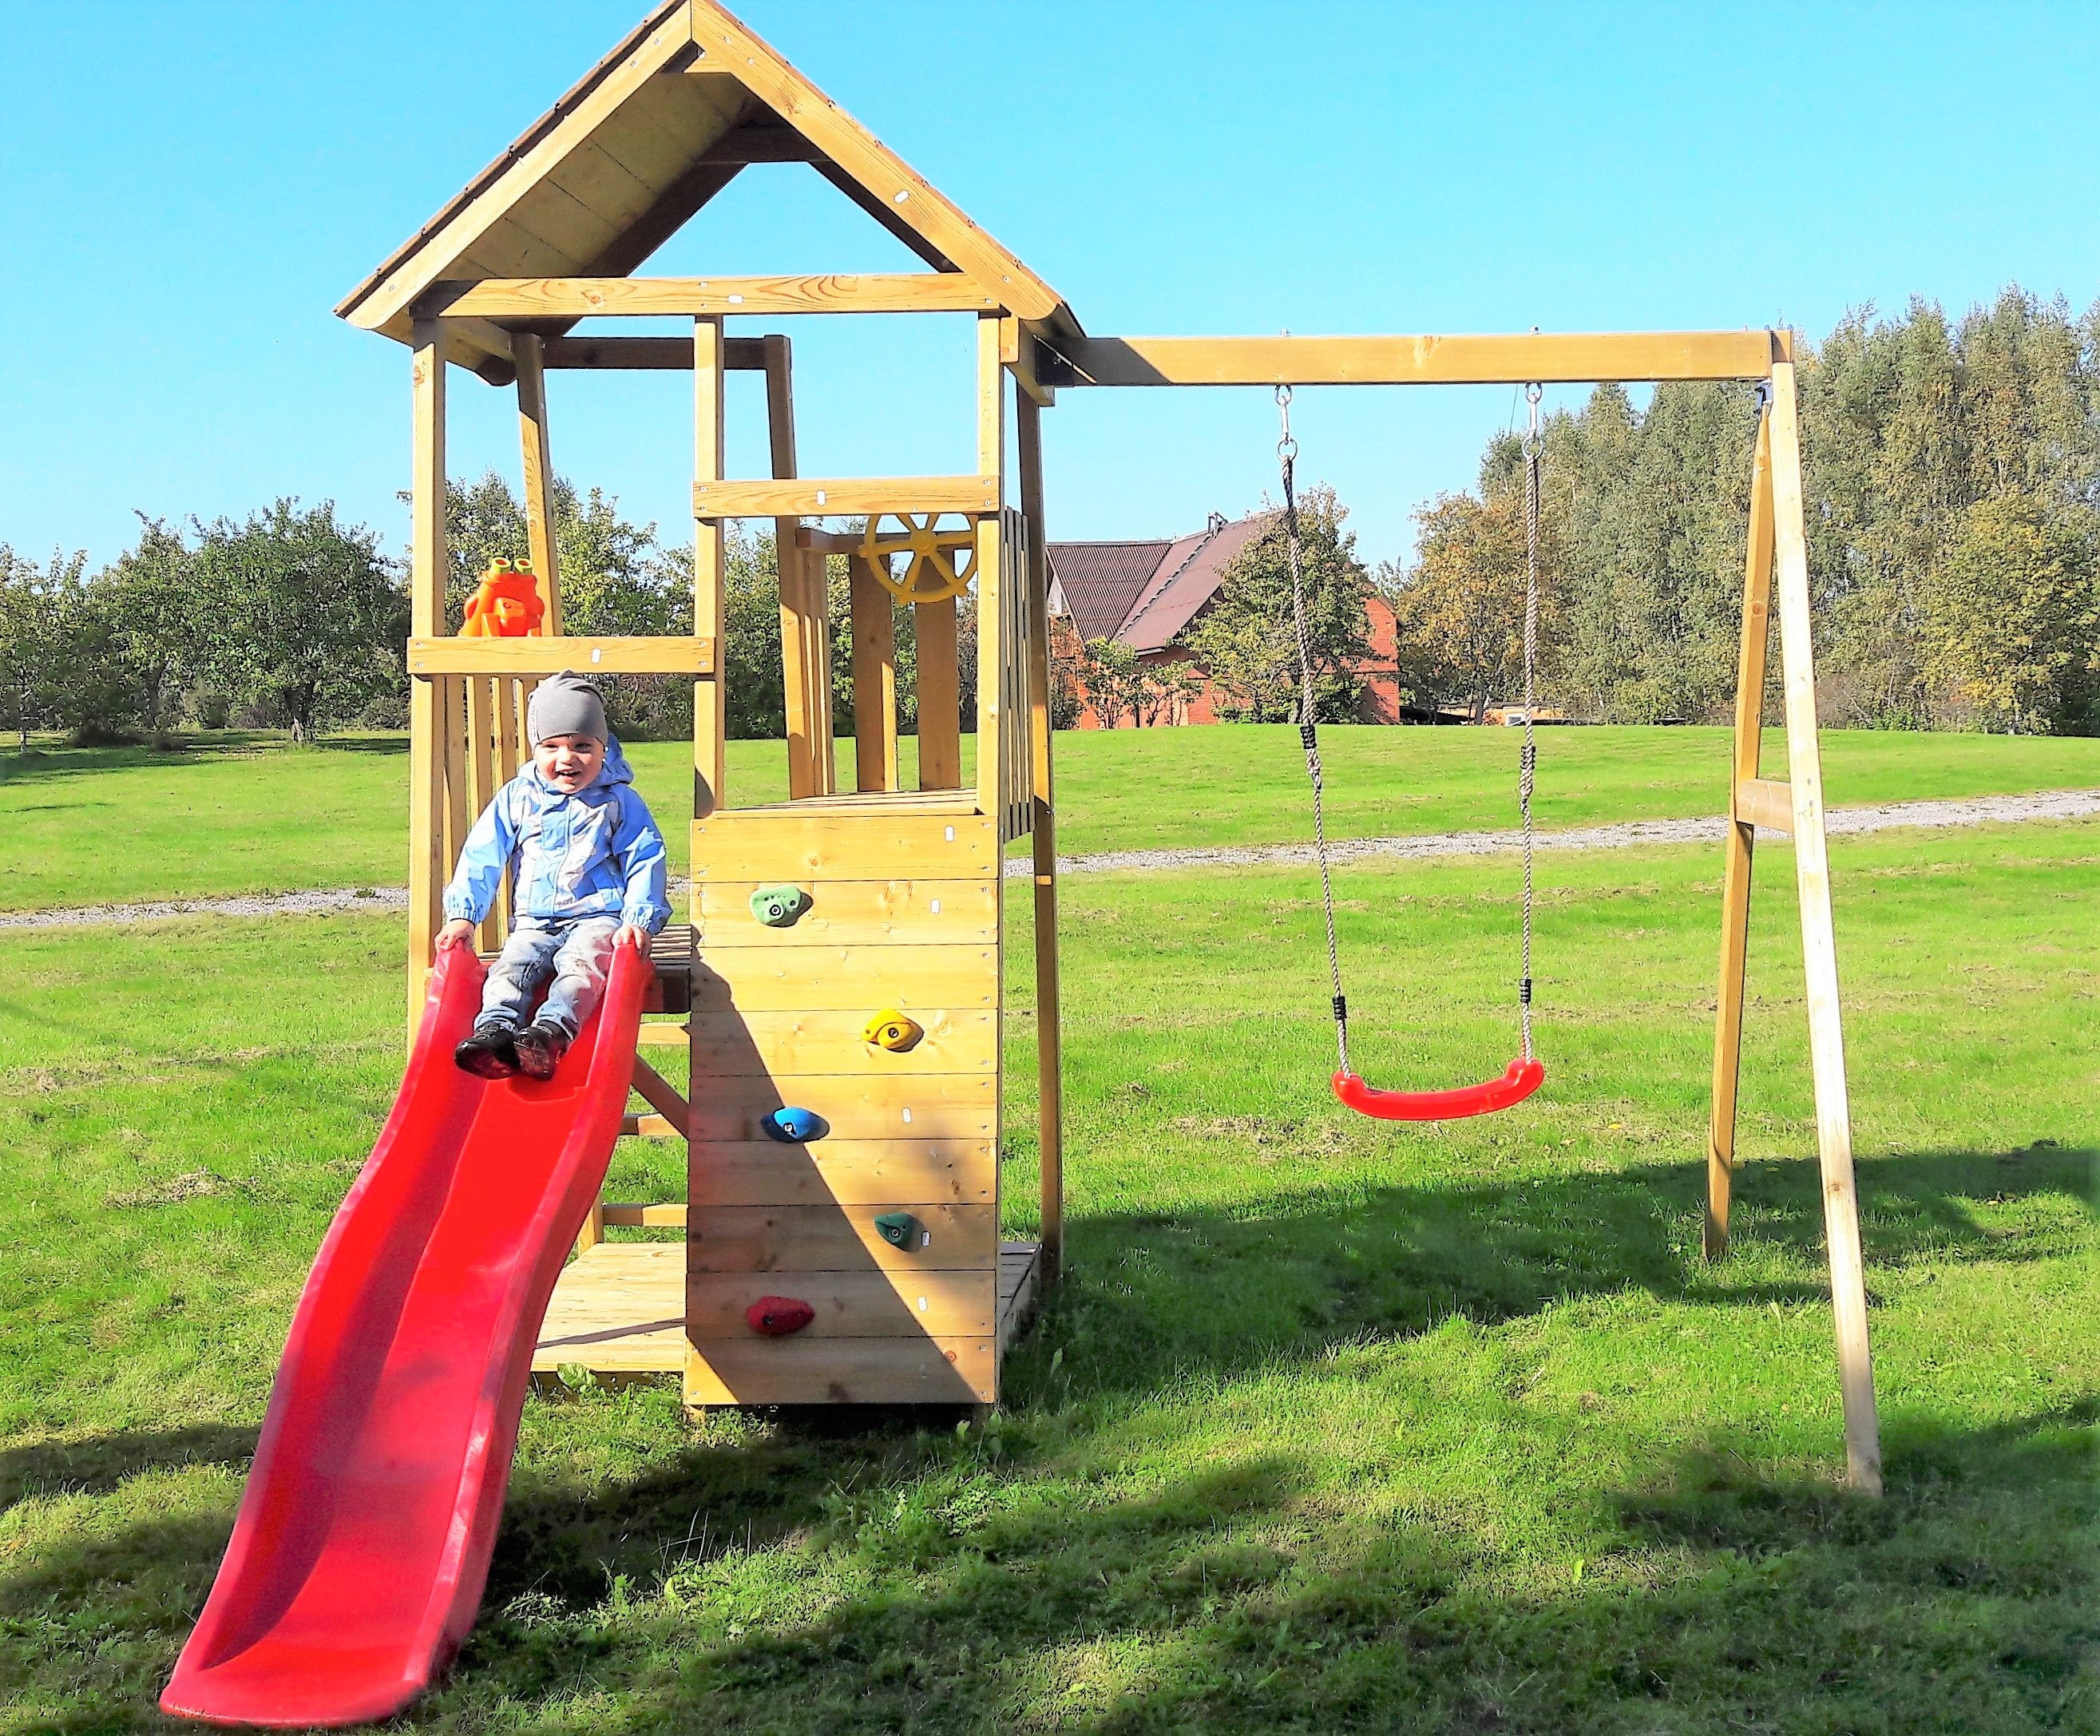 J4 Junior Activity Tower with Slide, Sandpit and Single Swing